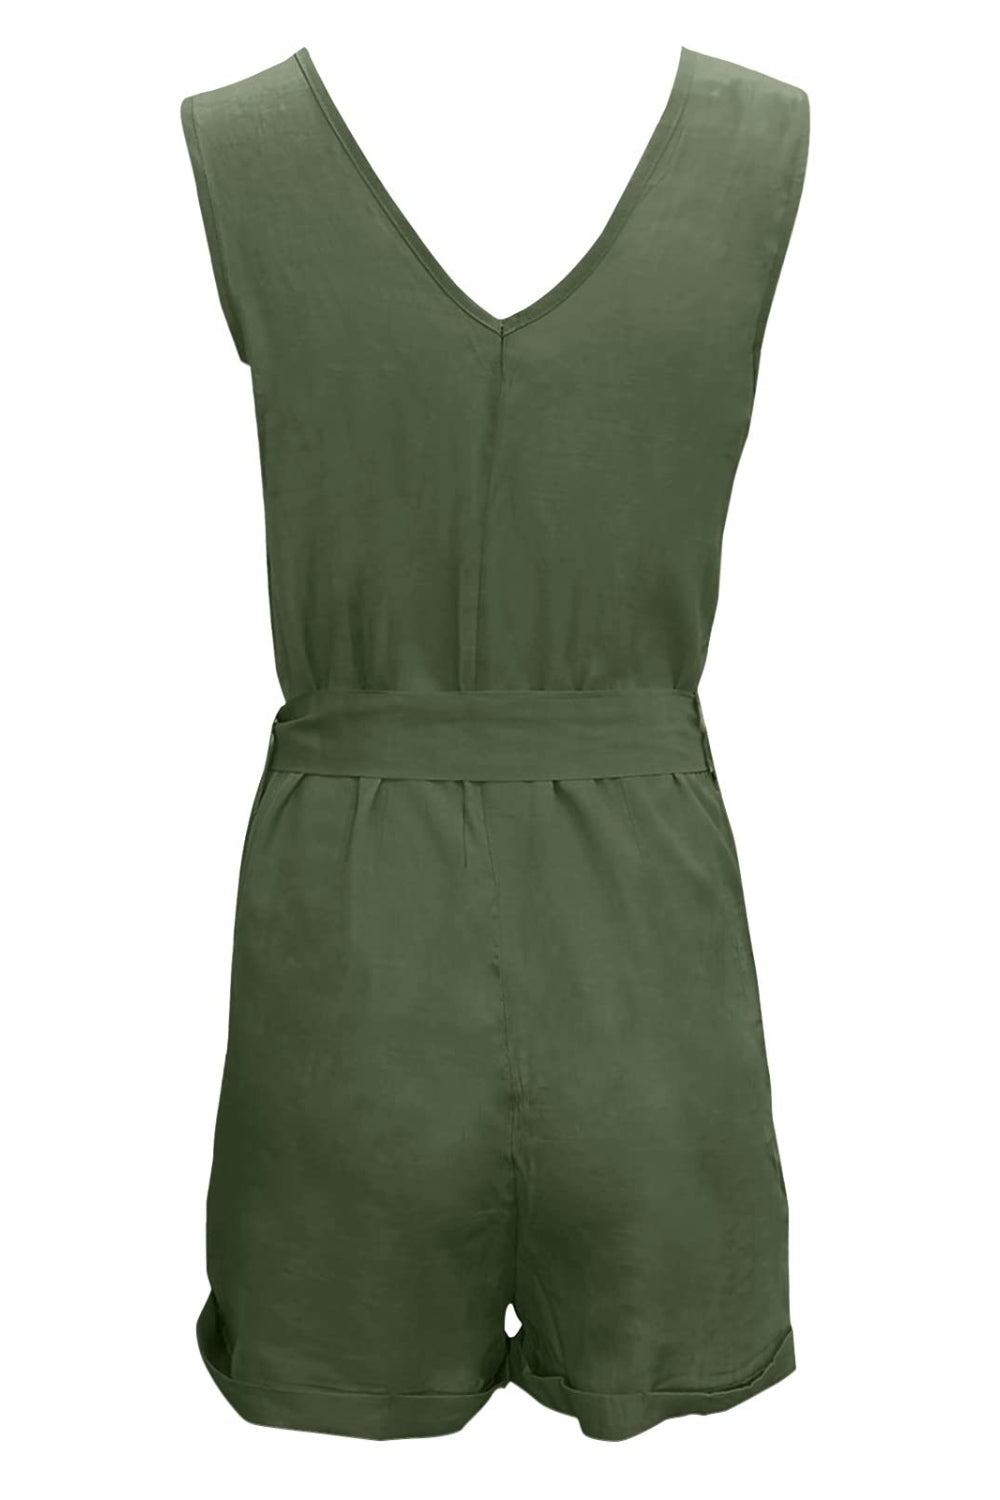 PREORDER- Full Size Tied V-Neck Sleeveless Romper with Pockets